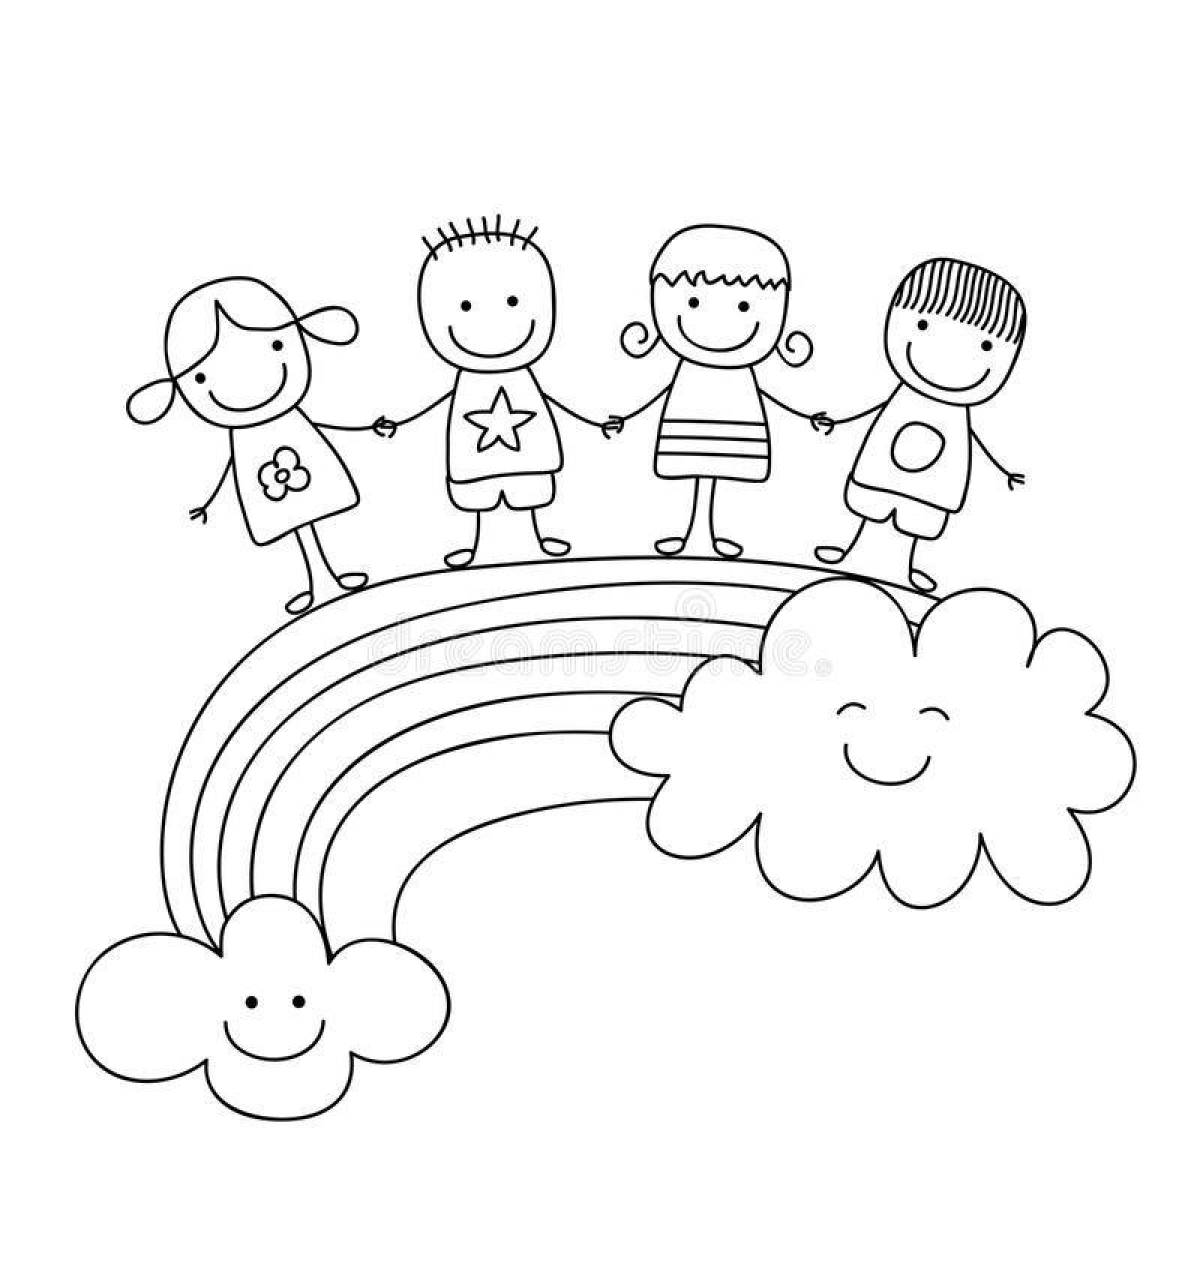 Magic rainbow friends coloring page